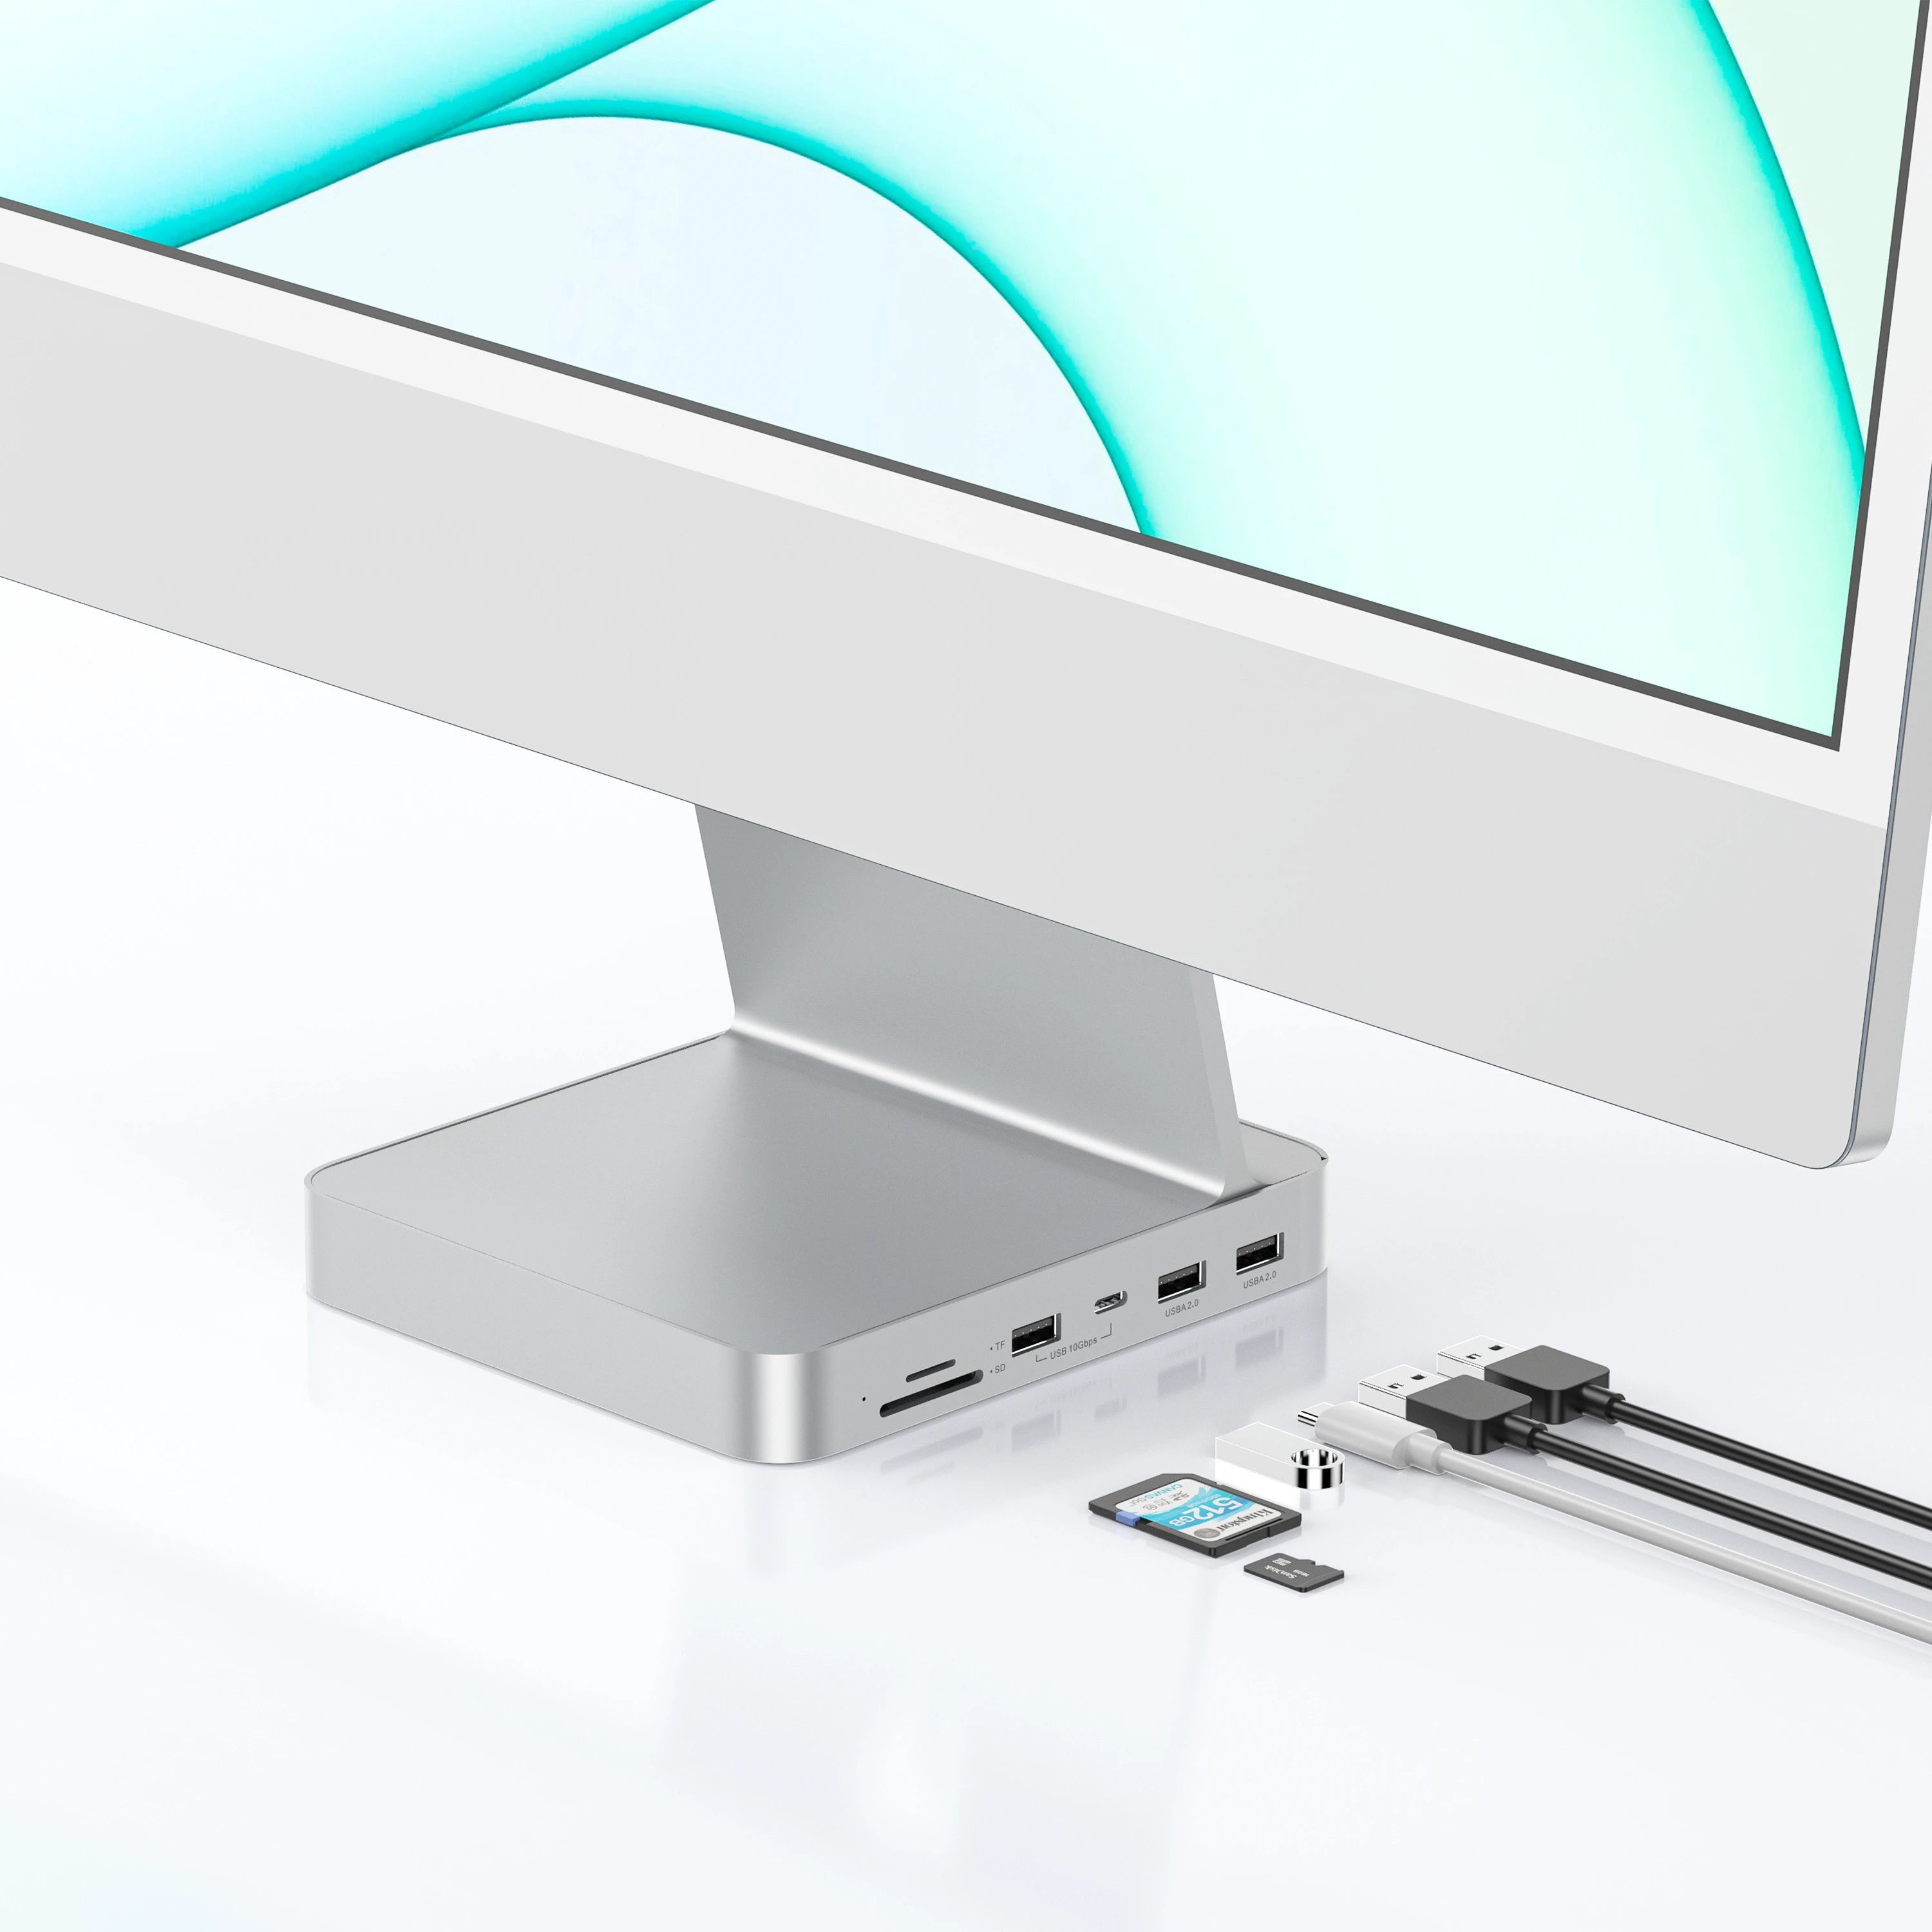 PULWTOP 7-in-1 USB C HUB for iMac 24-inch 2021, USB Hub Adapter iMac Accessory, Docking Station Supports Expansion M.2 NVMe SSD (Not Included)-Silver